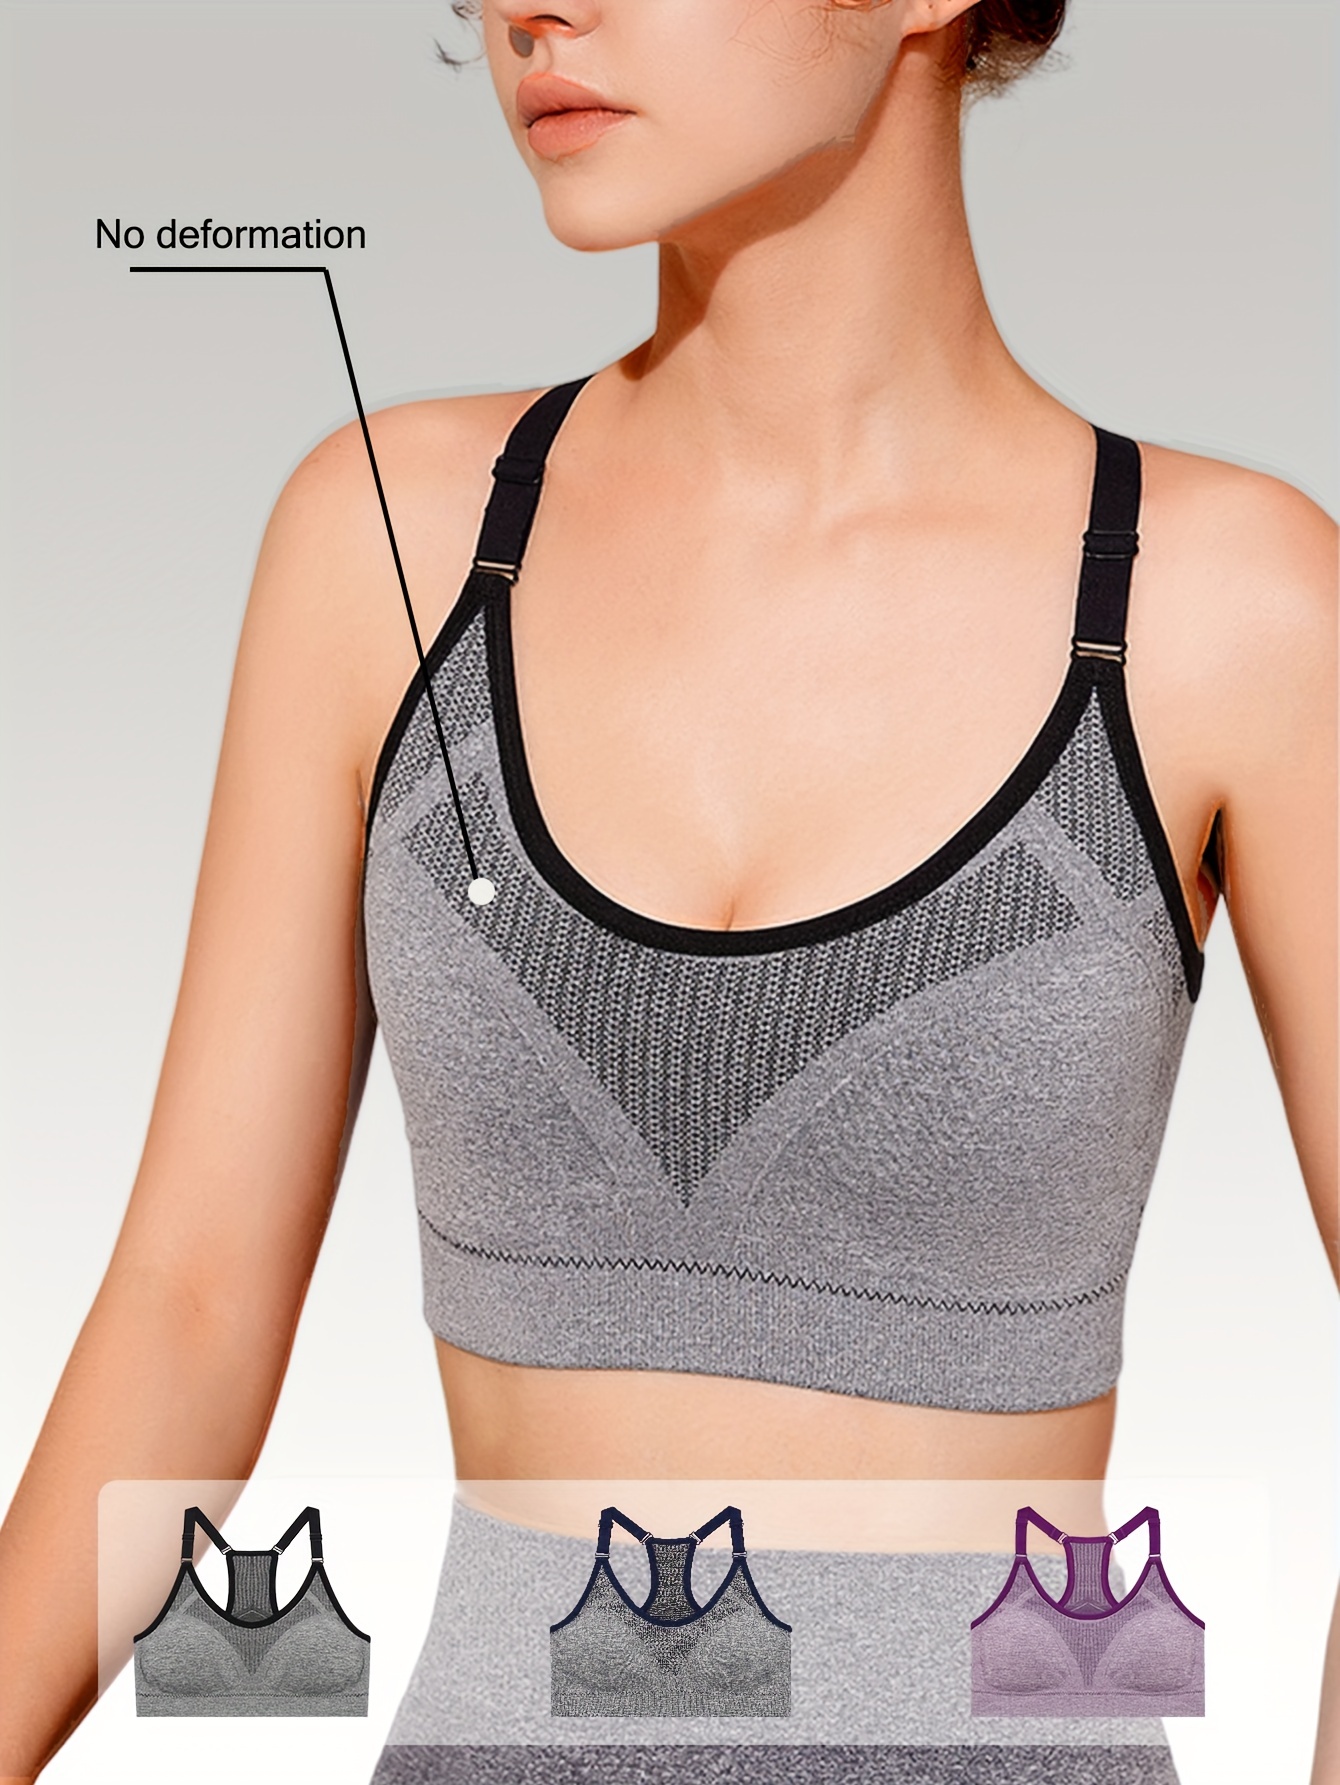 Breathable Sports Bras for Women, Push Up Bra, Fitness Gym Running